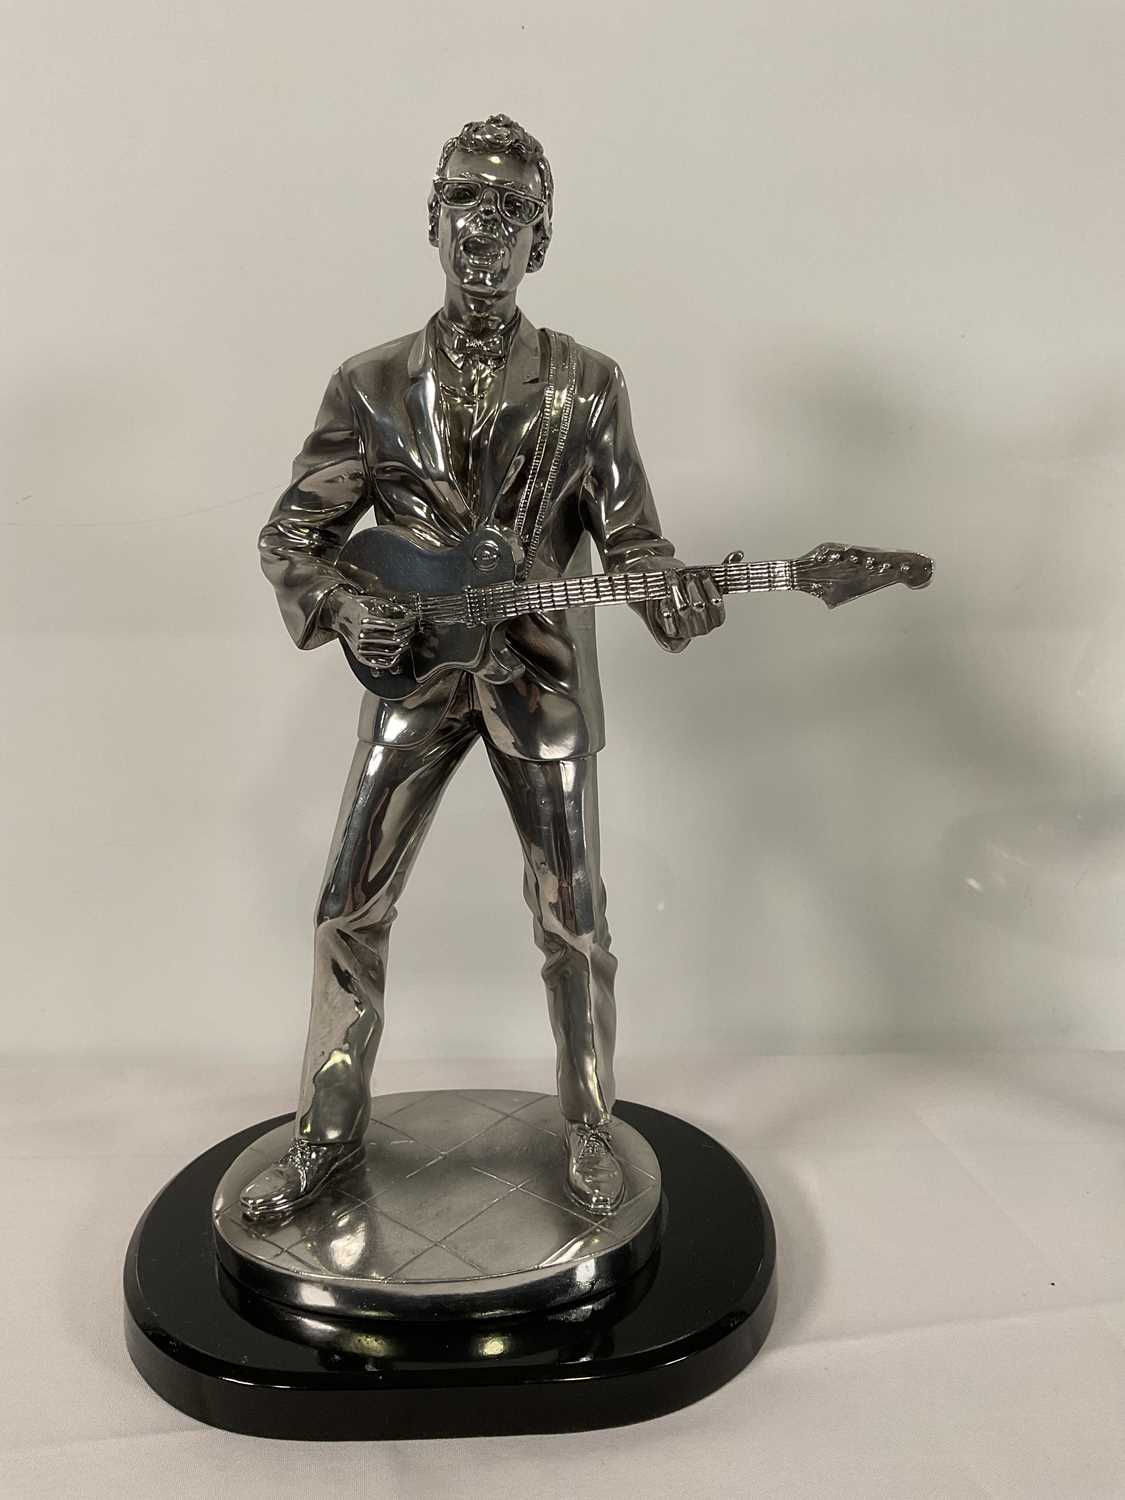 A pair of Silver Dreams by Leonardo (2005/6) statuettes of Cliff Richard and Hank Marvin in - Image 2 of 3